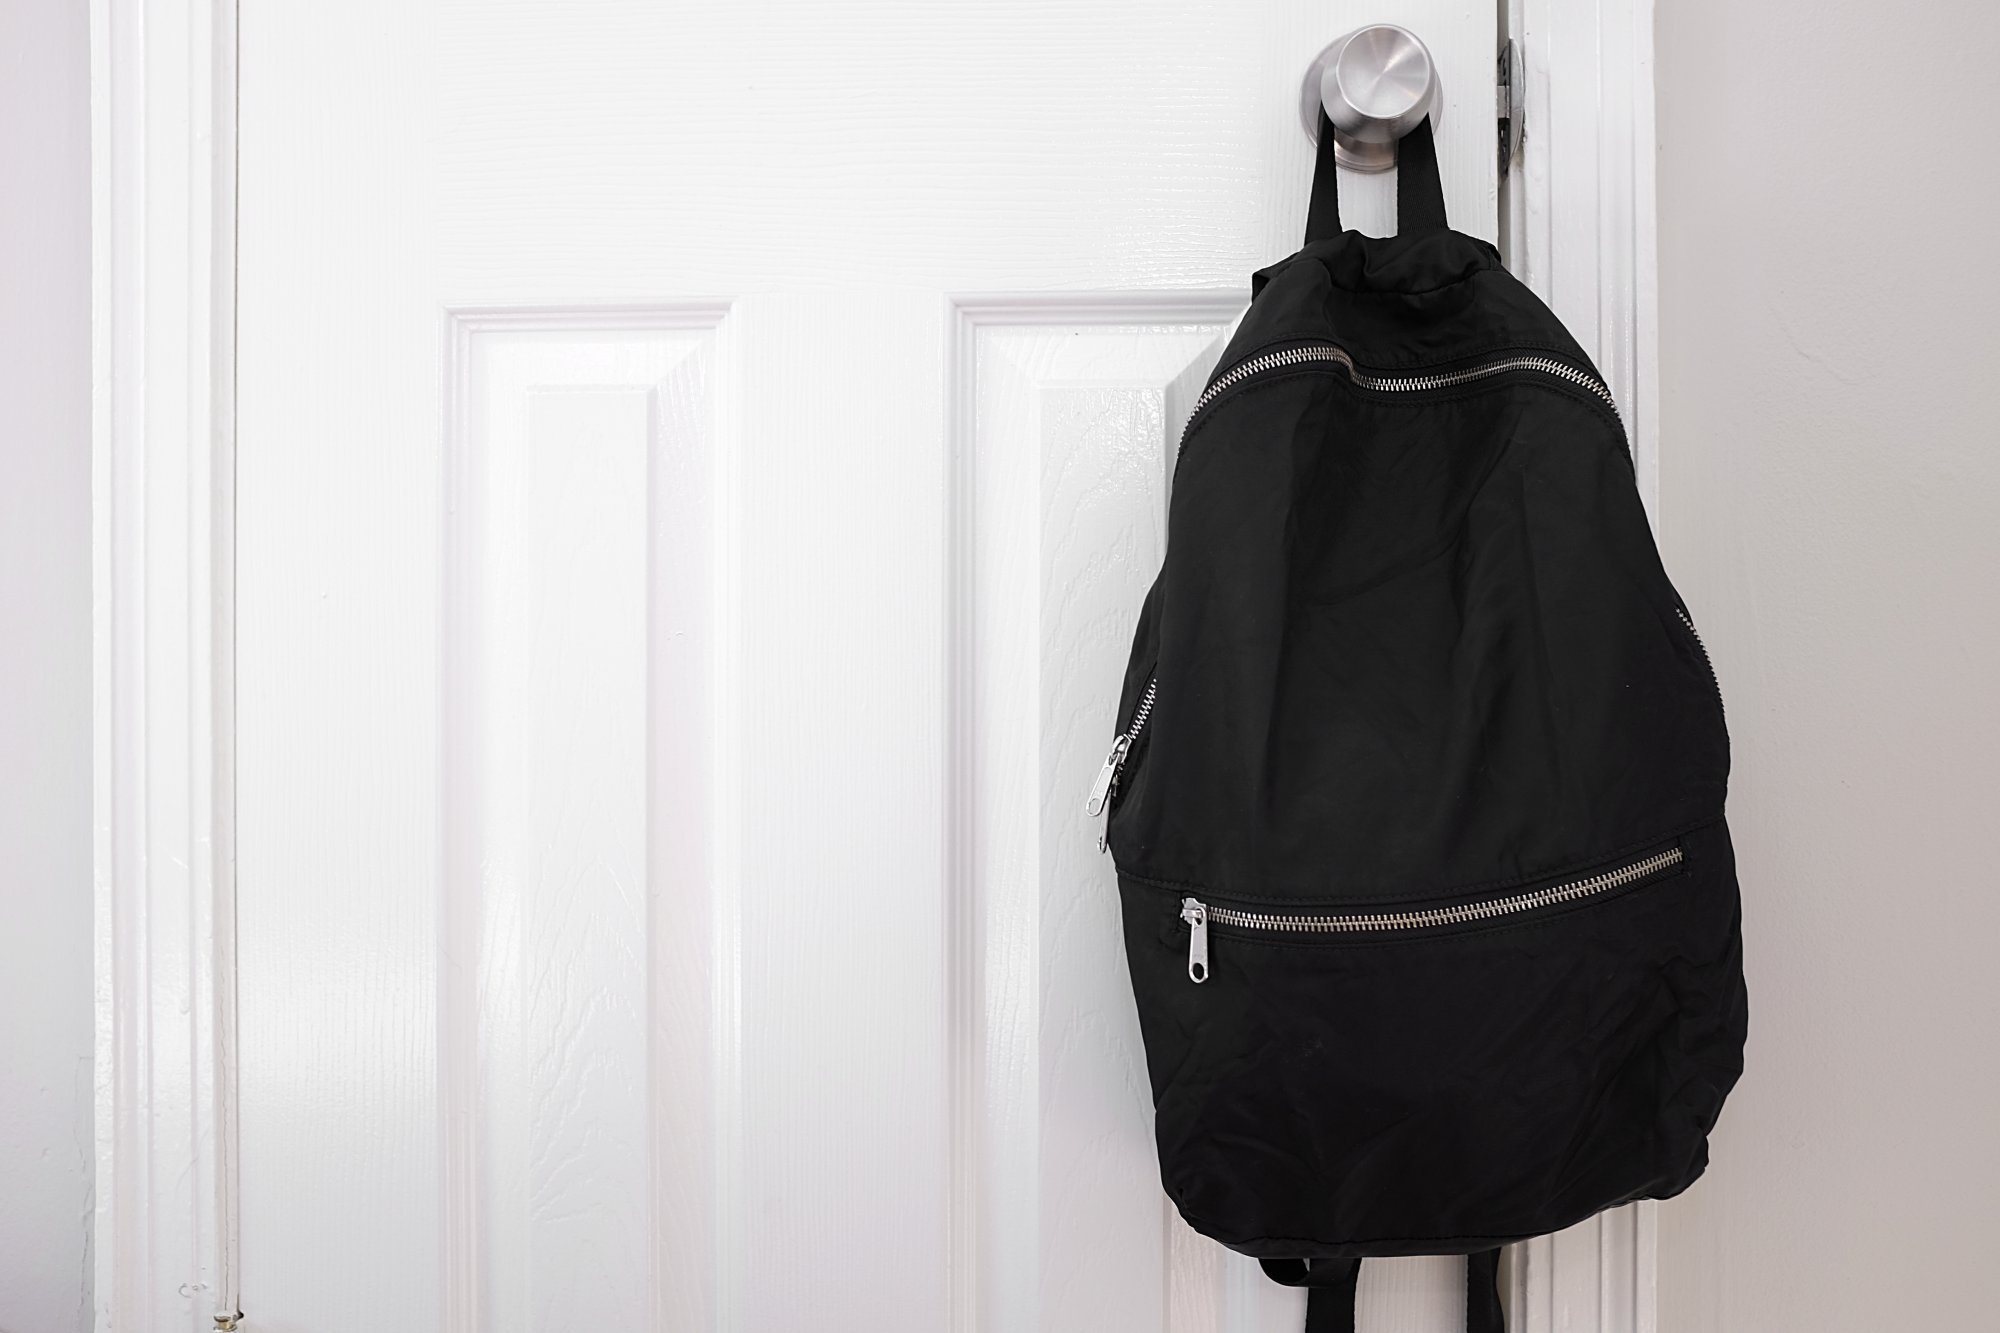 The packable backpack from Everlane hangs on a door handle